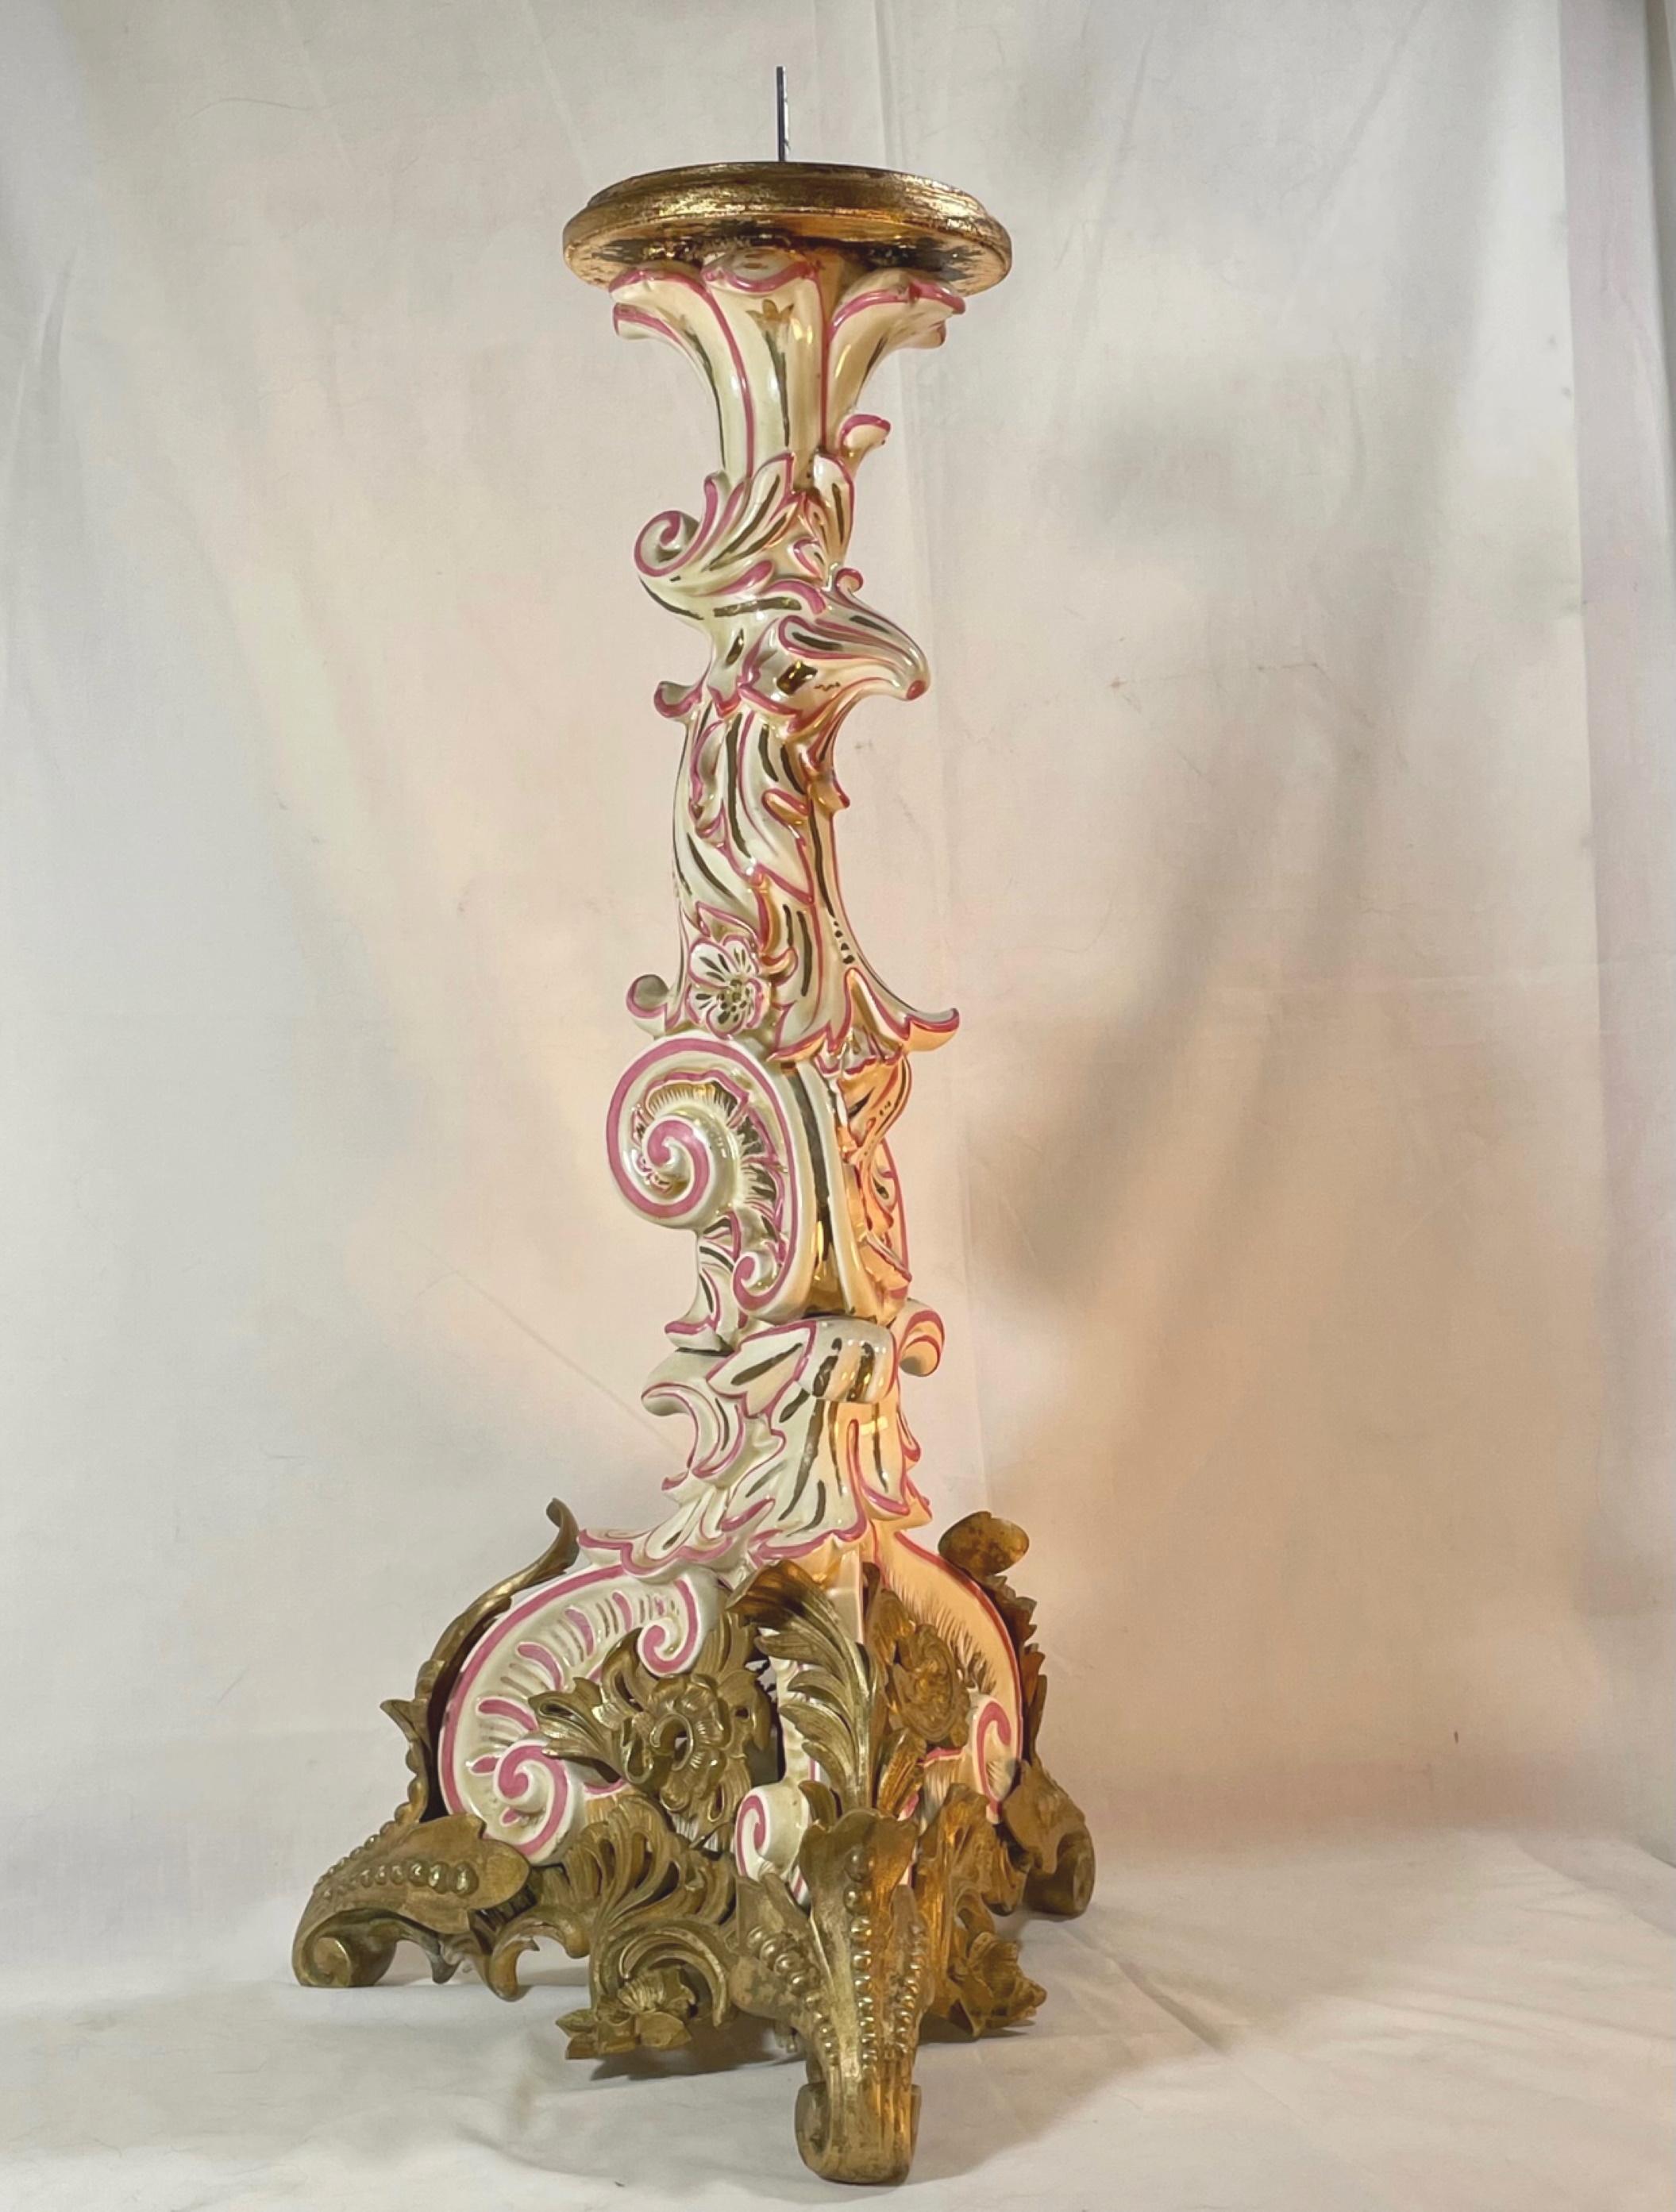 Large French Strasbourg 19th Century Faience tall floor candle holder with Ormolu

19th century French Strasbourg faience floor candle holder in Rococo style. Extremely beautiful and elegant, the torchiere is decorated in a burgundy and gold